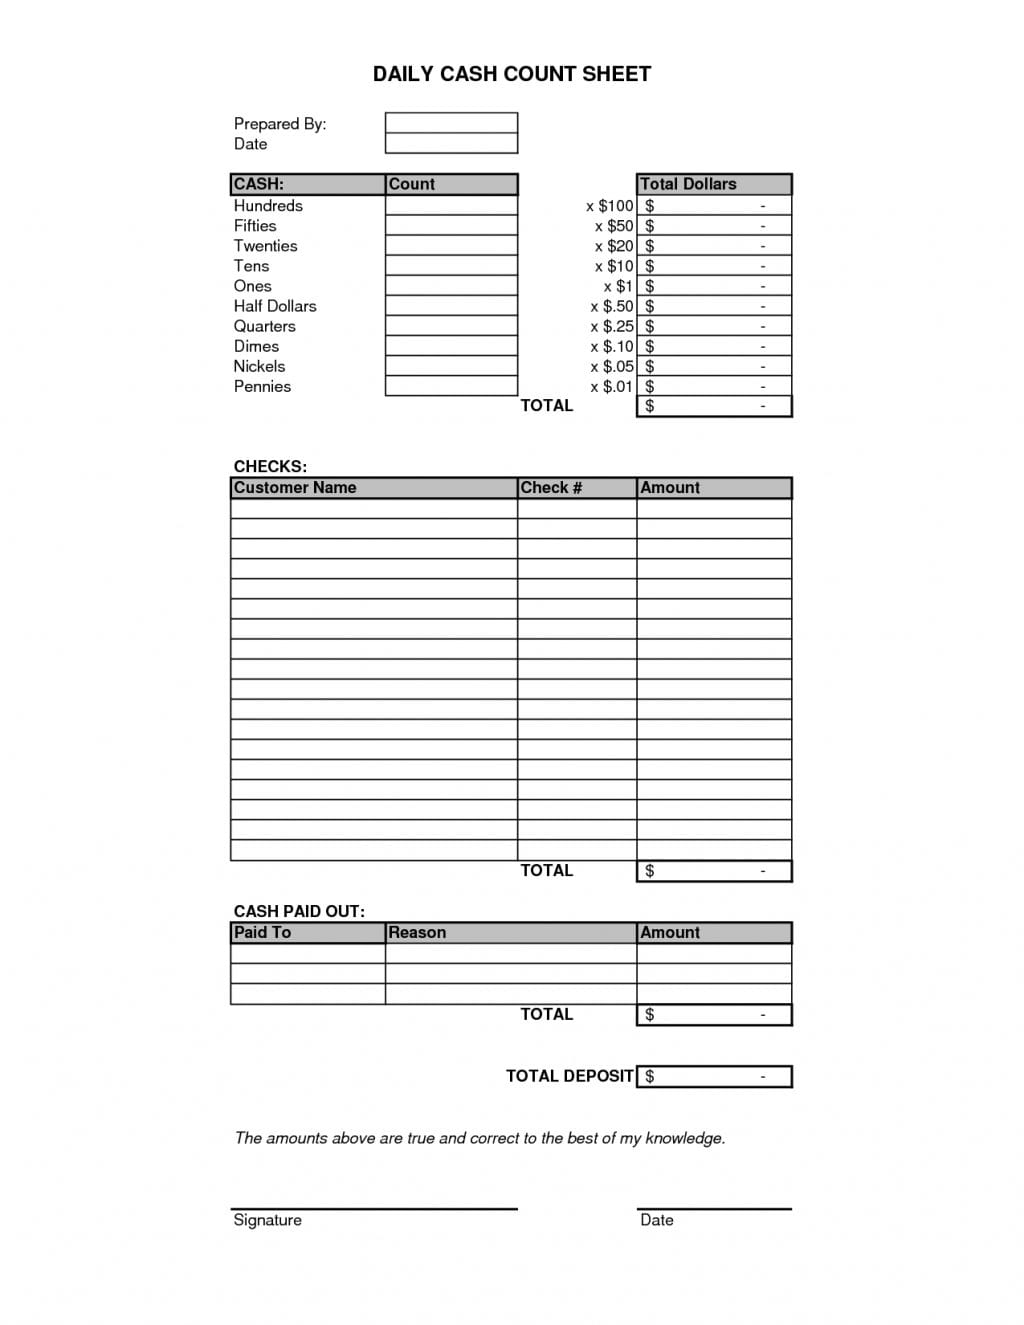 Cash Sheet Ate Free Daily Personal Flow Excel Count Register